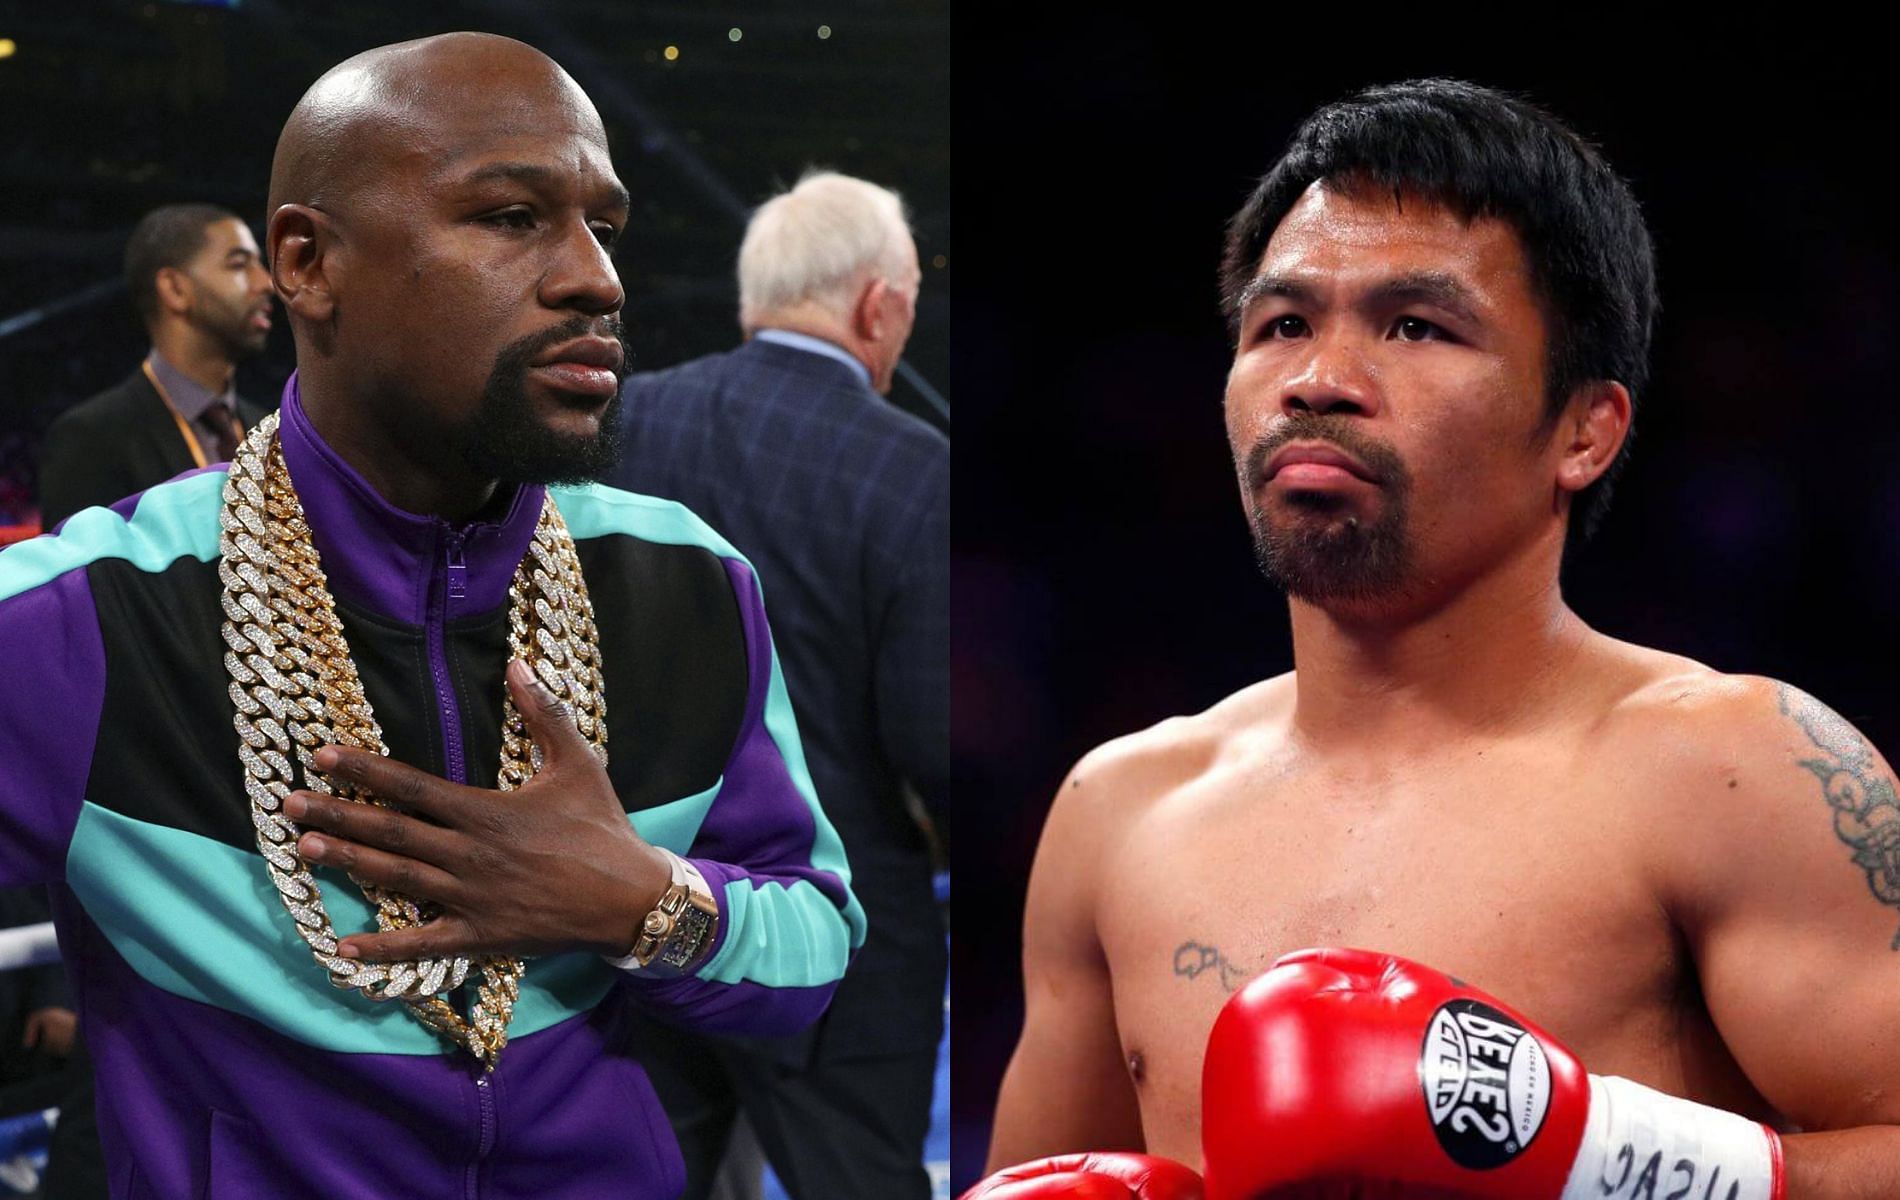 Floyd Mayweather (left) and Manny Pacquiao (right)